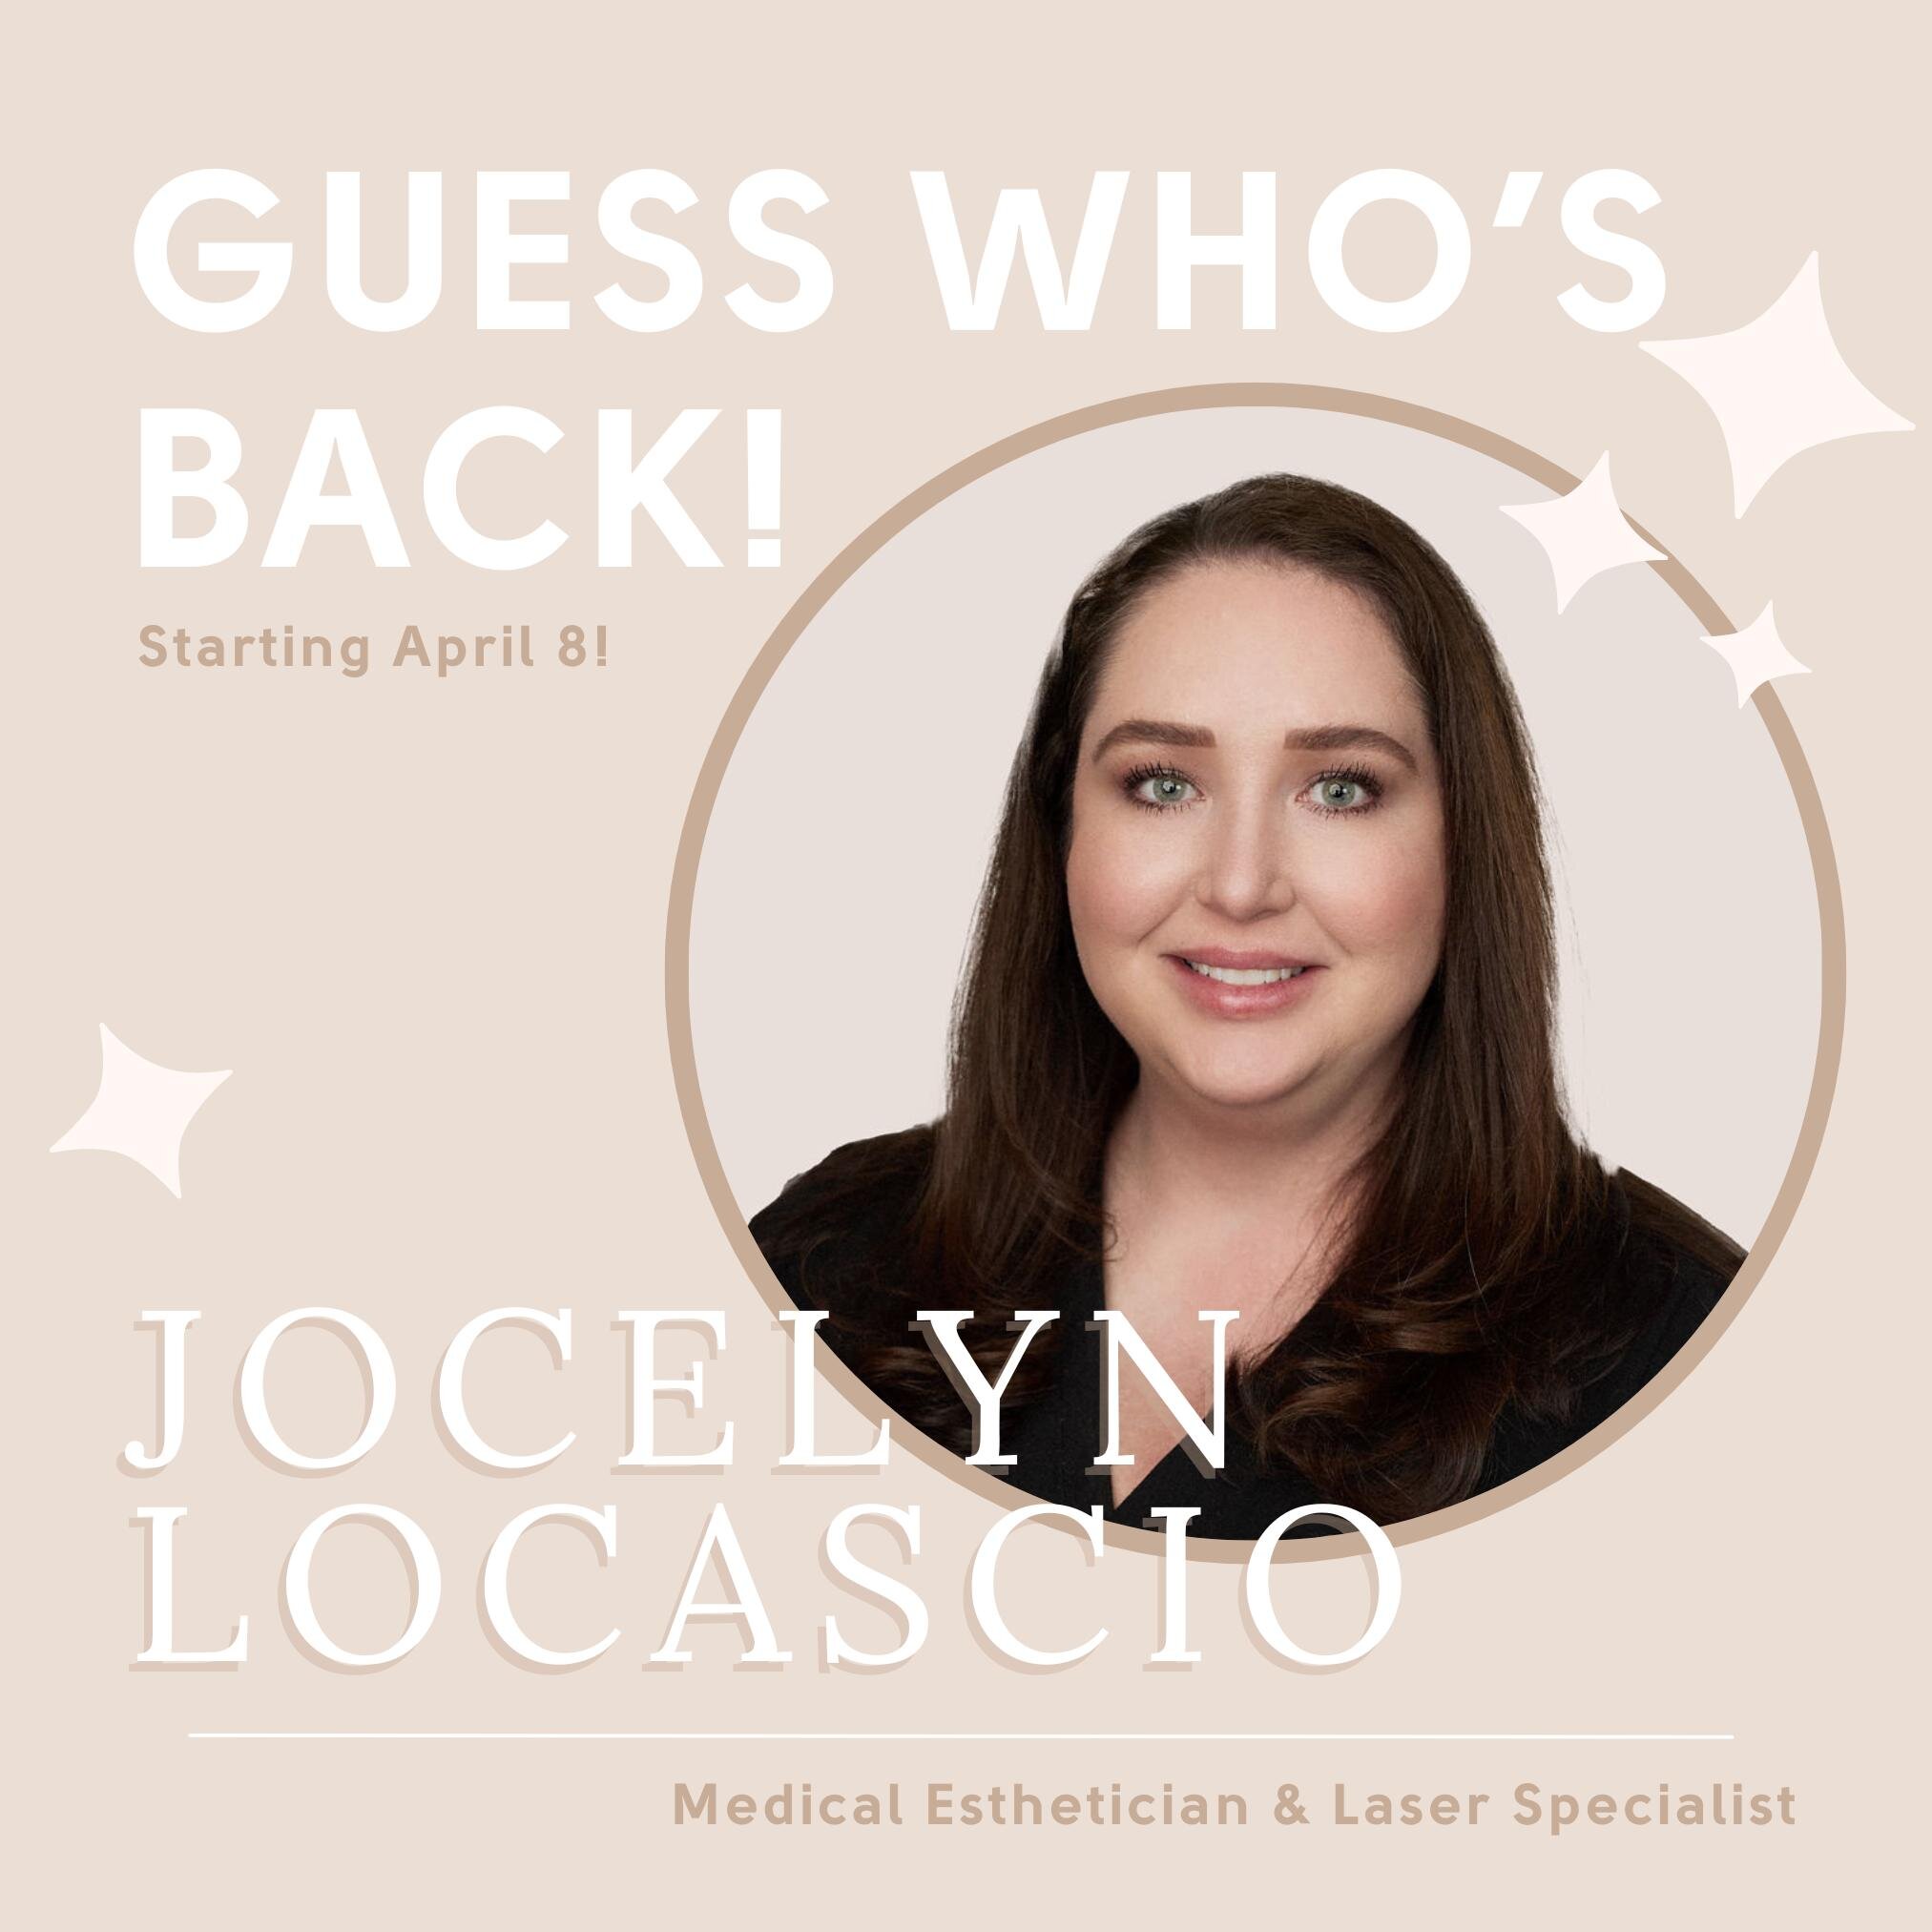 @thelaserskinexpert is back and excited to see you! 💕

We're thrilled to announce that Jocelyn is back!

Get on her books!
⭐ Monday, 9am to 5pm
⭐ Tuesday, 10am to 6pm
⭐ Thursday, 11am to 7pm

➡️ Book online or 📞 704.733.9202!

#infinitymedspaandwel